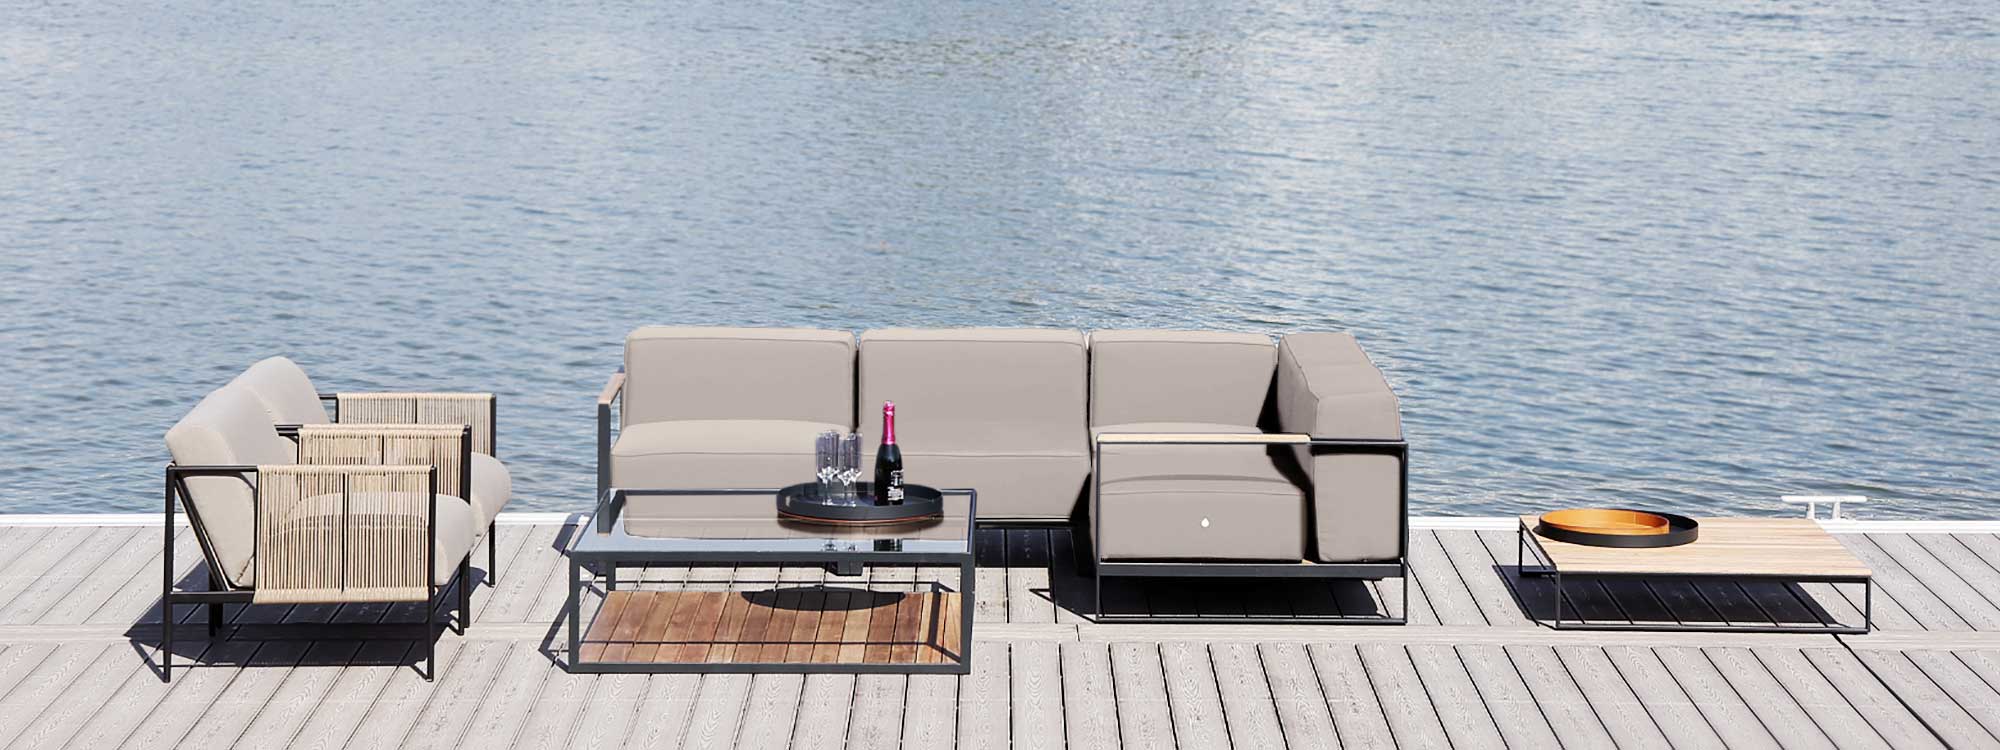 Image of Moore linear garden sofa and Antibes outdoor lounge chairs, shown on decked platform with still waters of a lake in the background